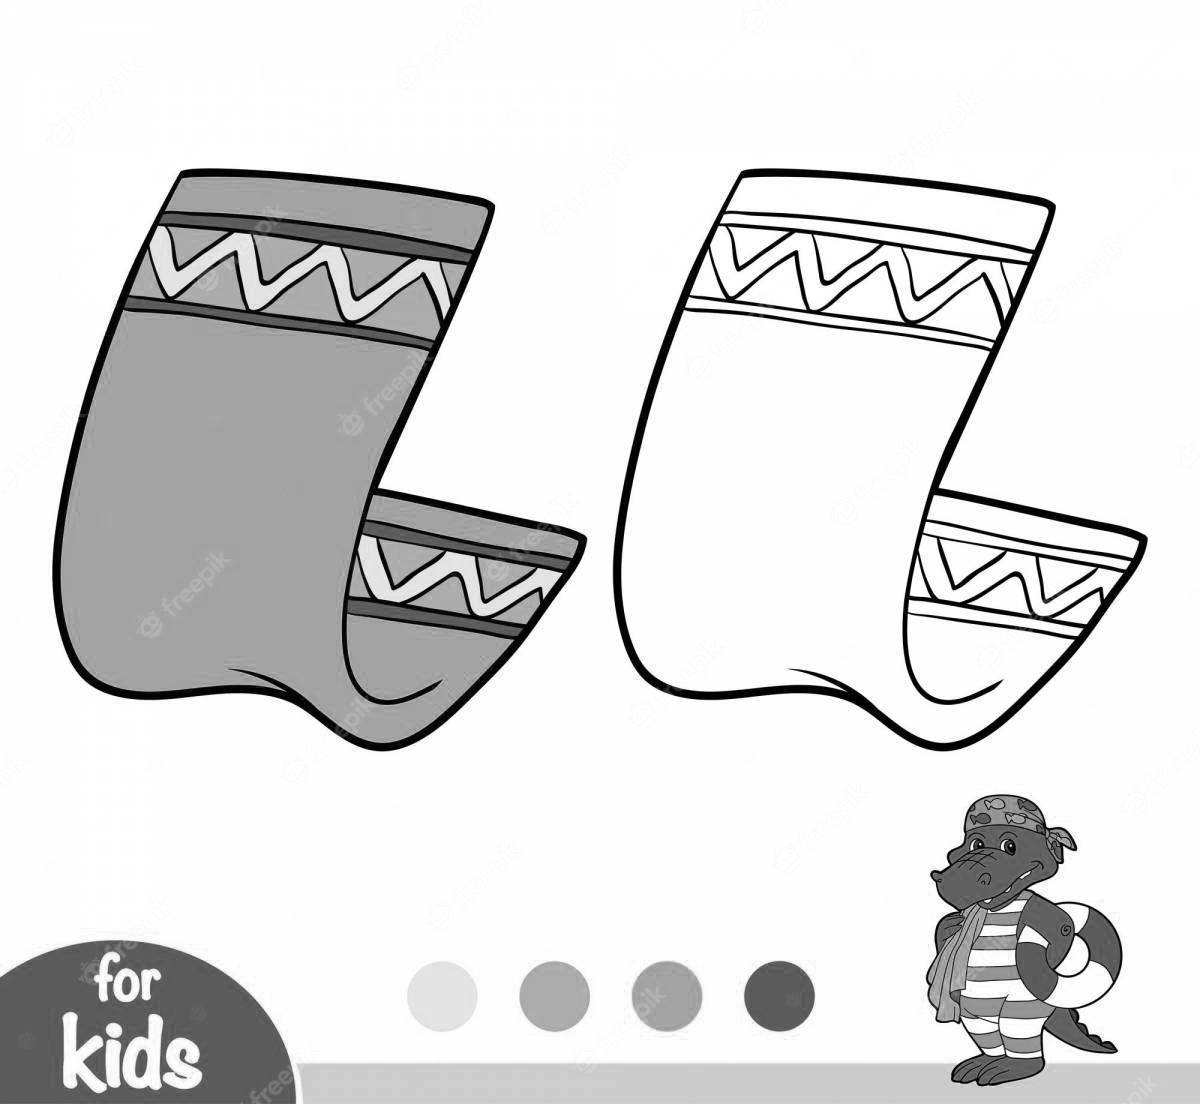 Adorable towel coloring book for kids